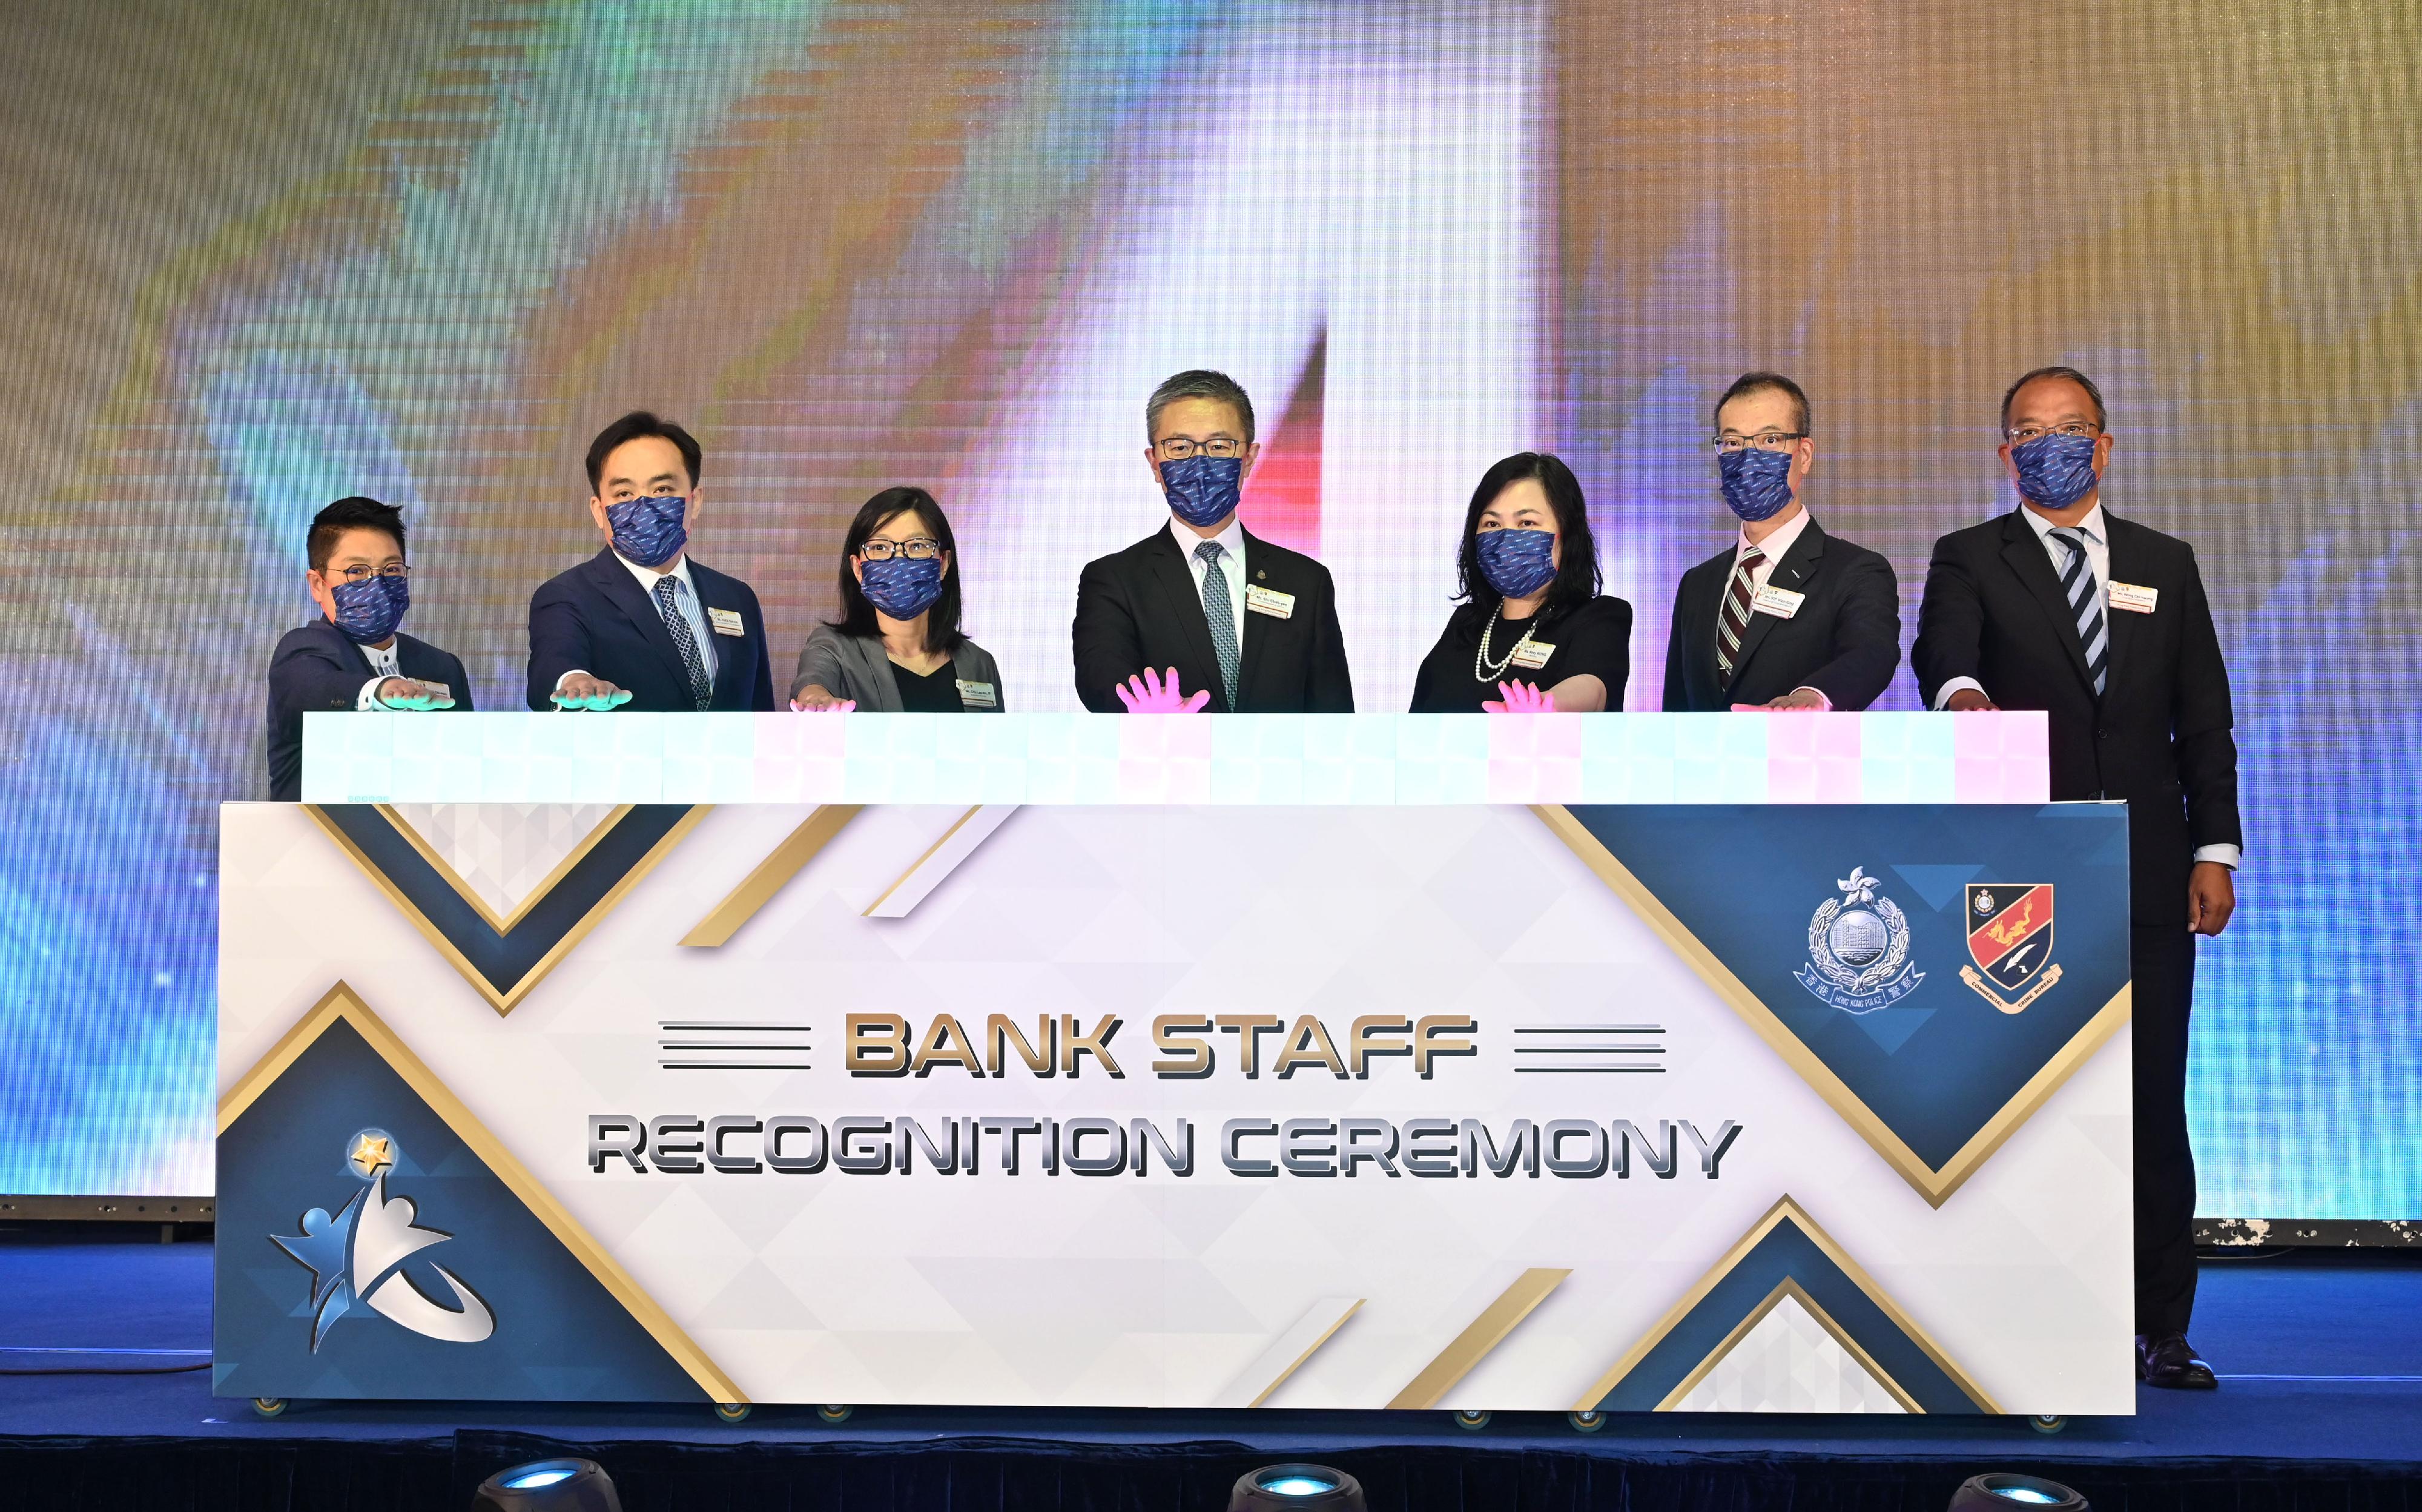 The Bank Staff Recognition Ceremony organised by the Hong Kong Police Force was held today (August 30). Photo shows (from left) the Acting Assistant Commissioner of Police (Crime), Ms Cheng Chi-man; the Deputy Commissioner of Police (Operations), Mr Yuen Yuk-kin; Executive Director of the Hong Kong Monetary Authority, Ms Carmen Chu; the Commissioner of Police, Mr Siu Chak-yee; representative of the Hong Kong Association of Banks, Ms Boey Wong; the Director of Crime and Security, Mr Yip Wan-lung; and the Chief Superintendent of Commercial Crime Bureau, Mr Wong Chi-kwong, kicking off the ceremony.